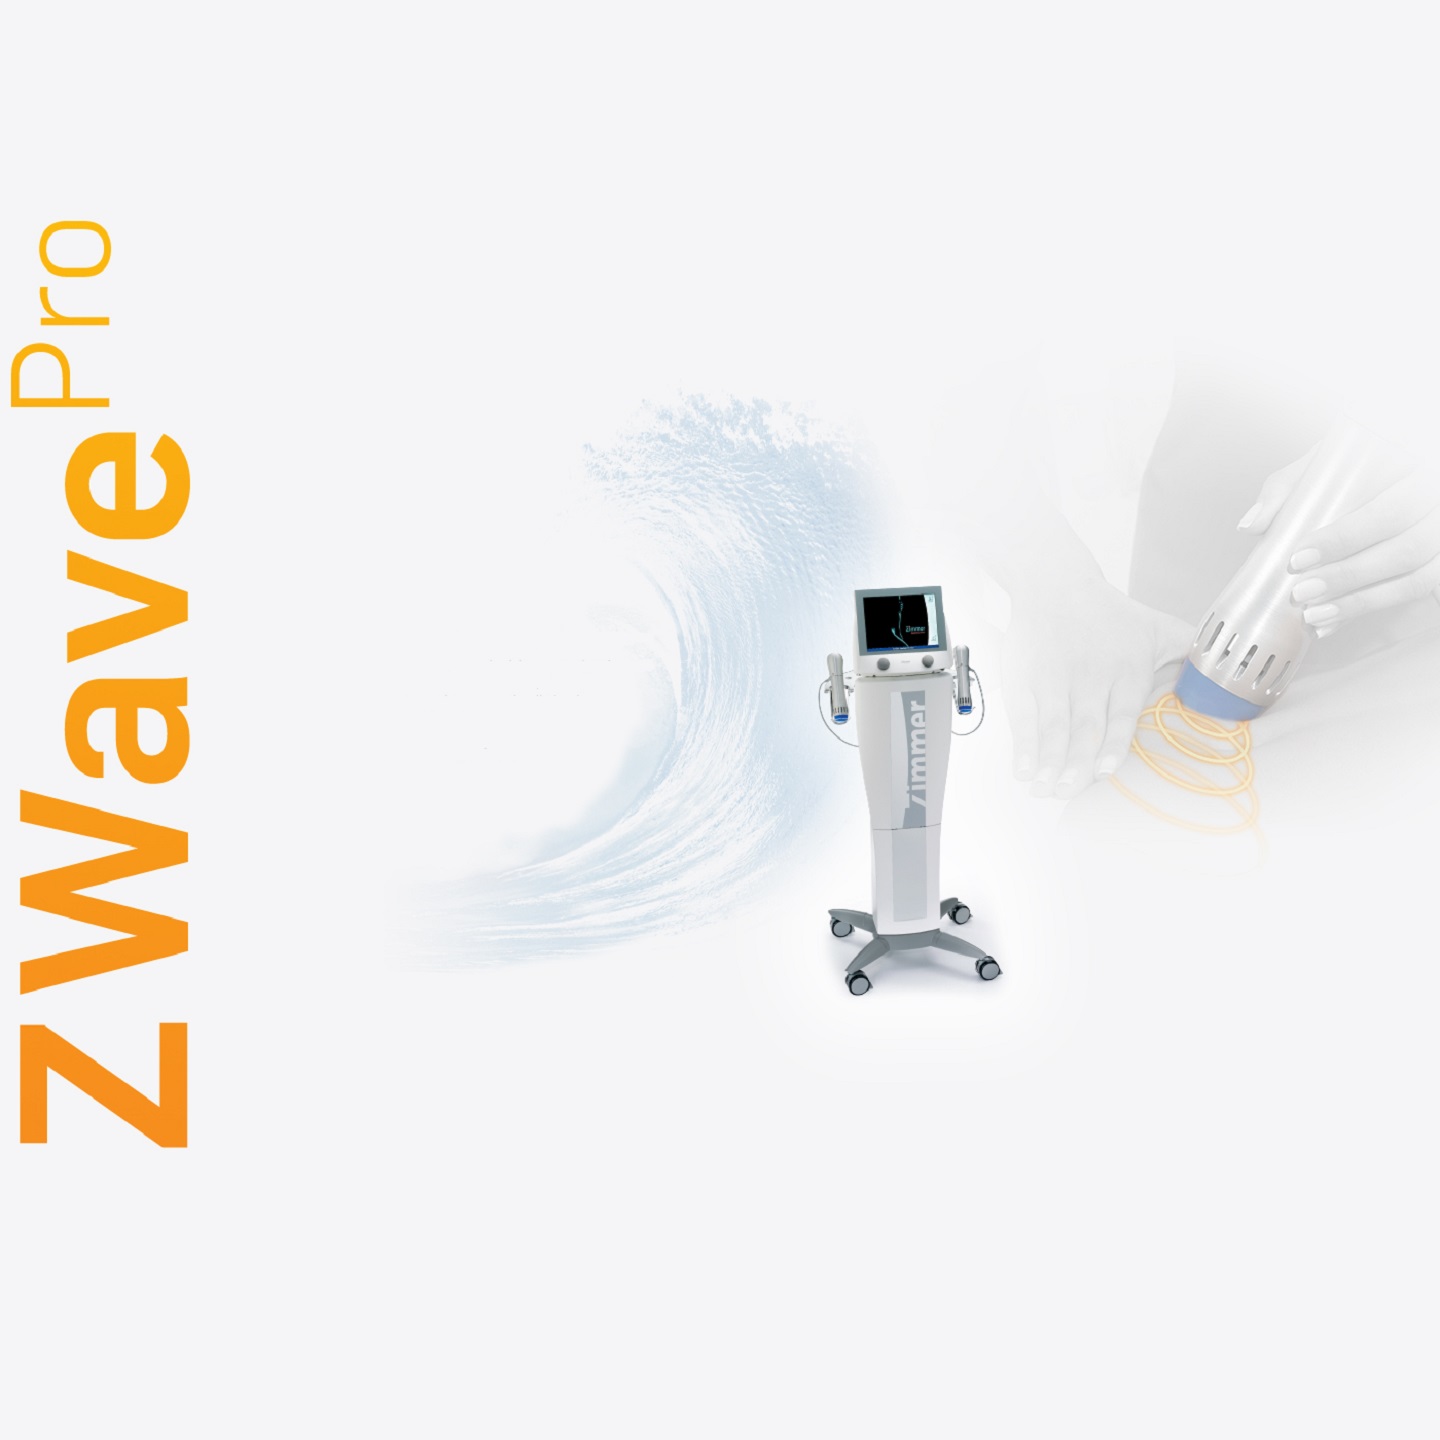 Exclusive to Cynosure! The Z Wave Pro